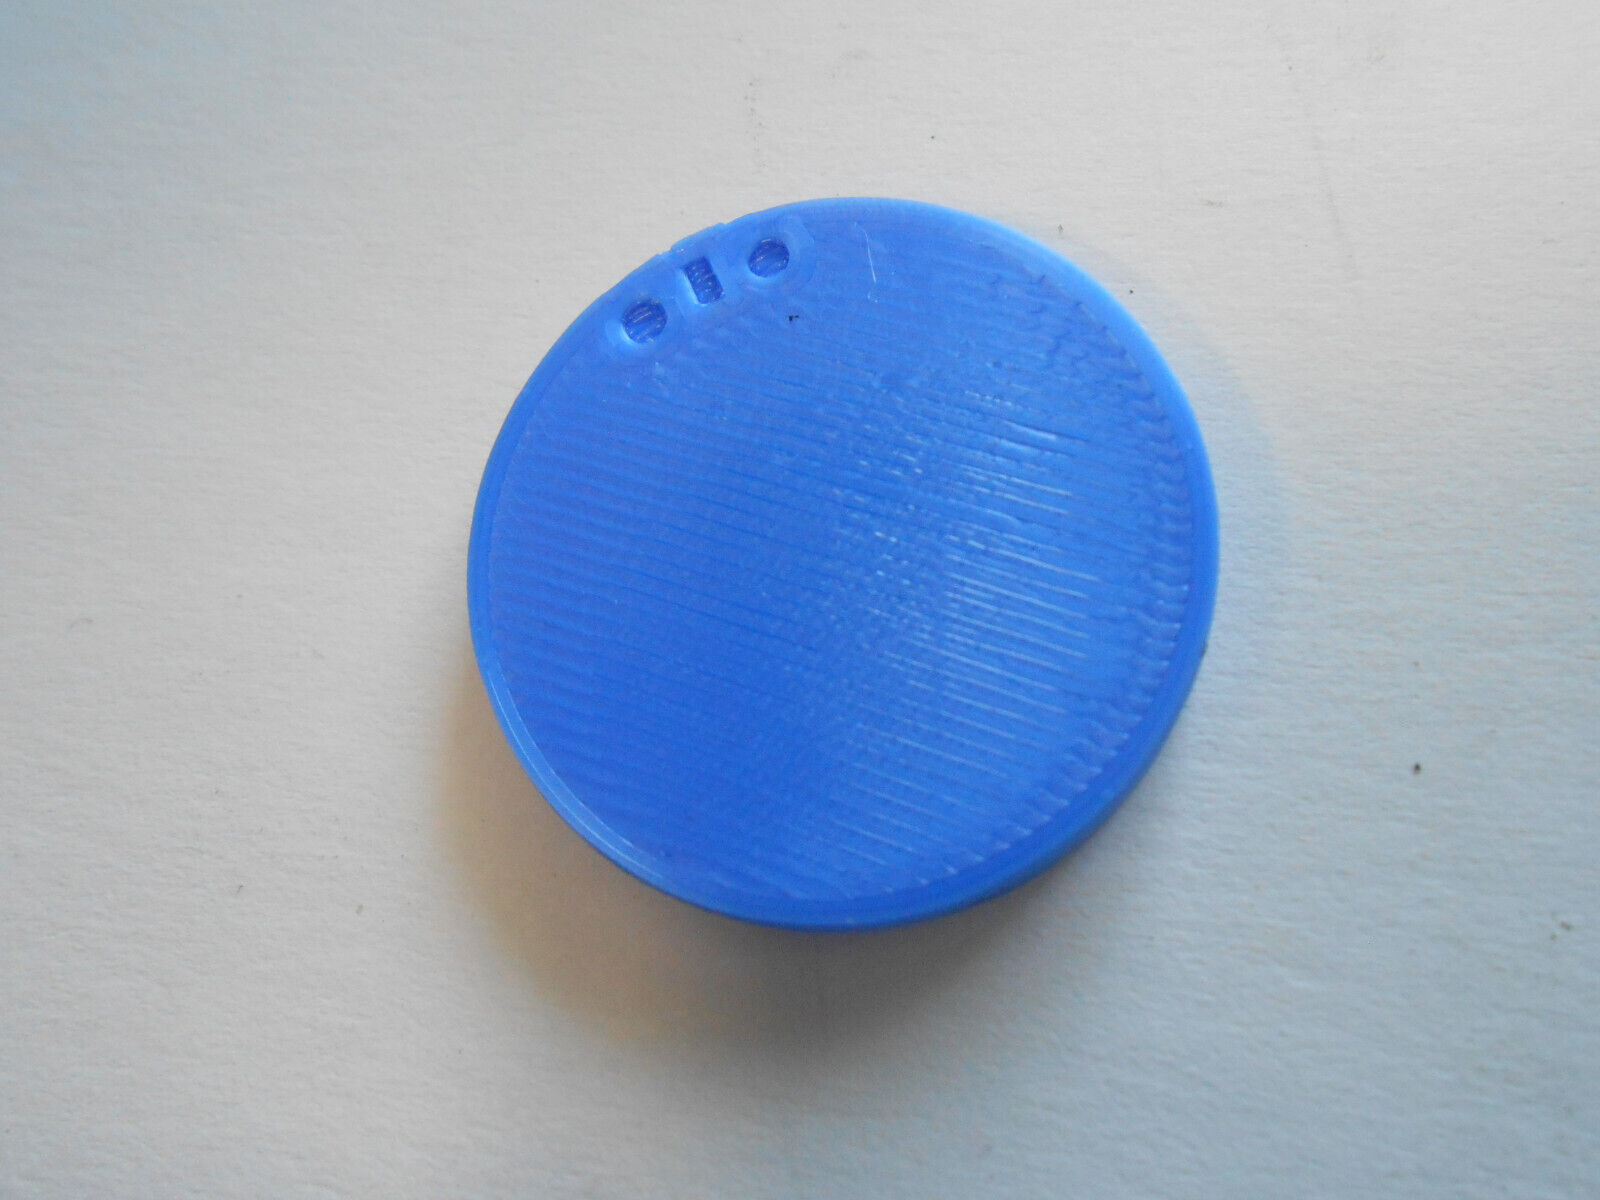 Commodore SX-64 Handle Screw Caps = Set of 2 = 3D Printed (NEW, Blue or Black)